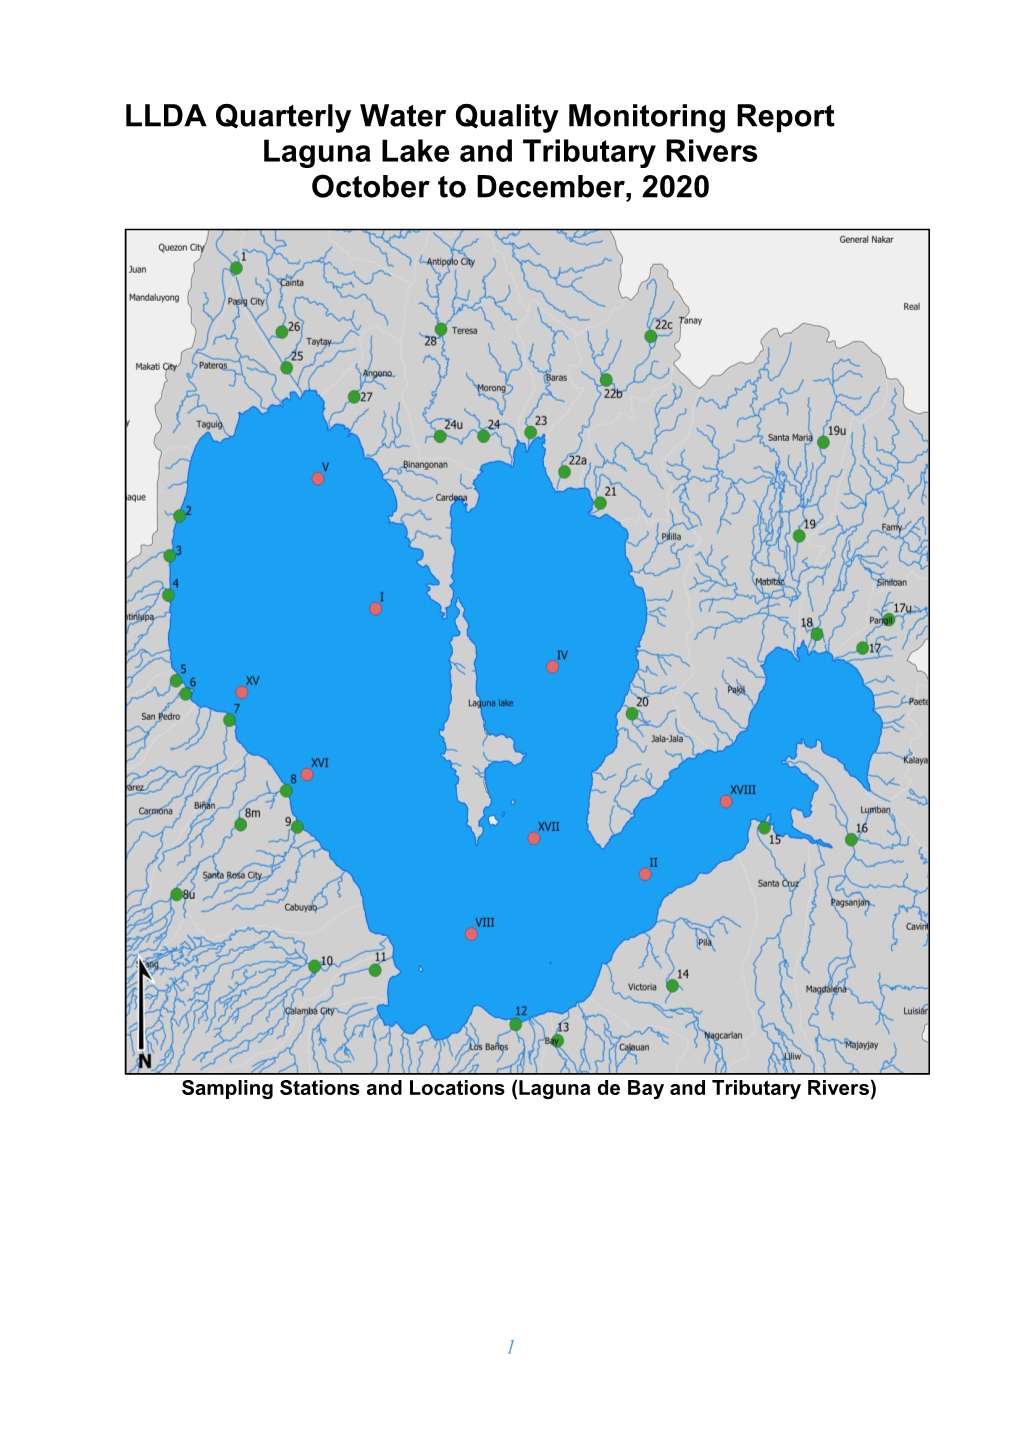 LLDA Quarterly Water Quality Monitoring Report Laguna Lake and Tributary Rivers October to December, 2020